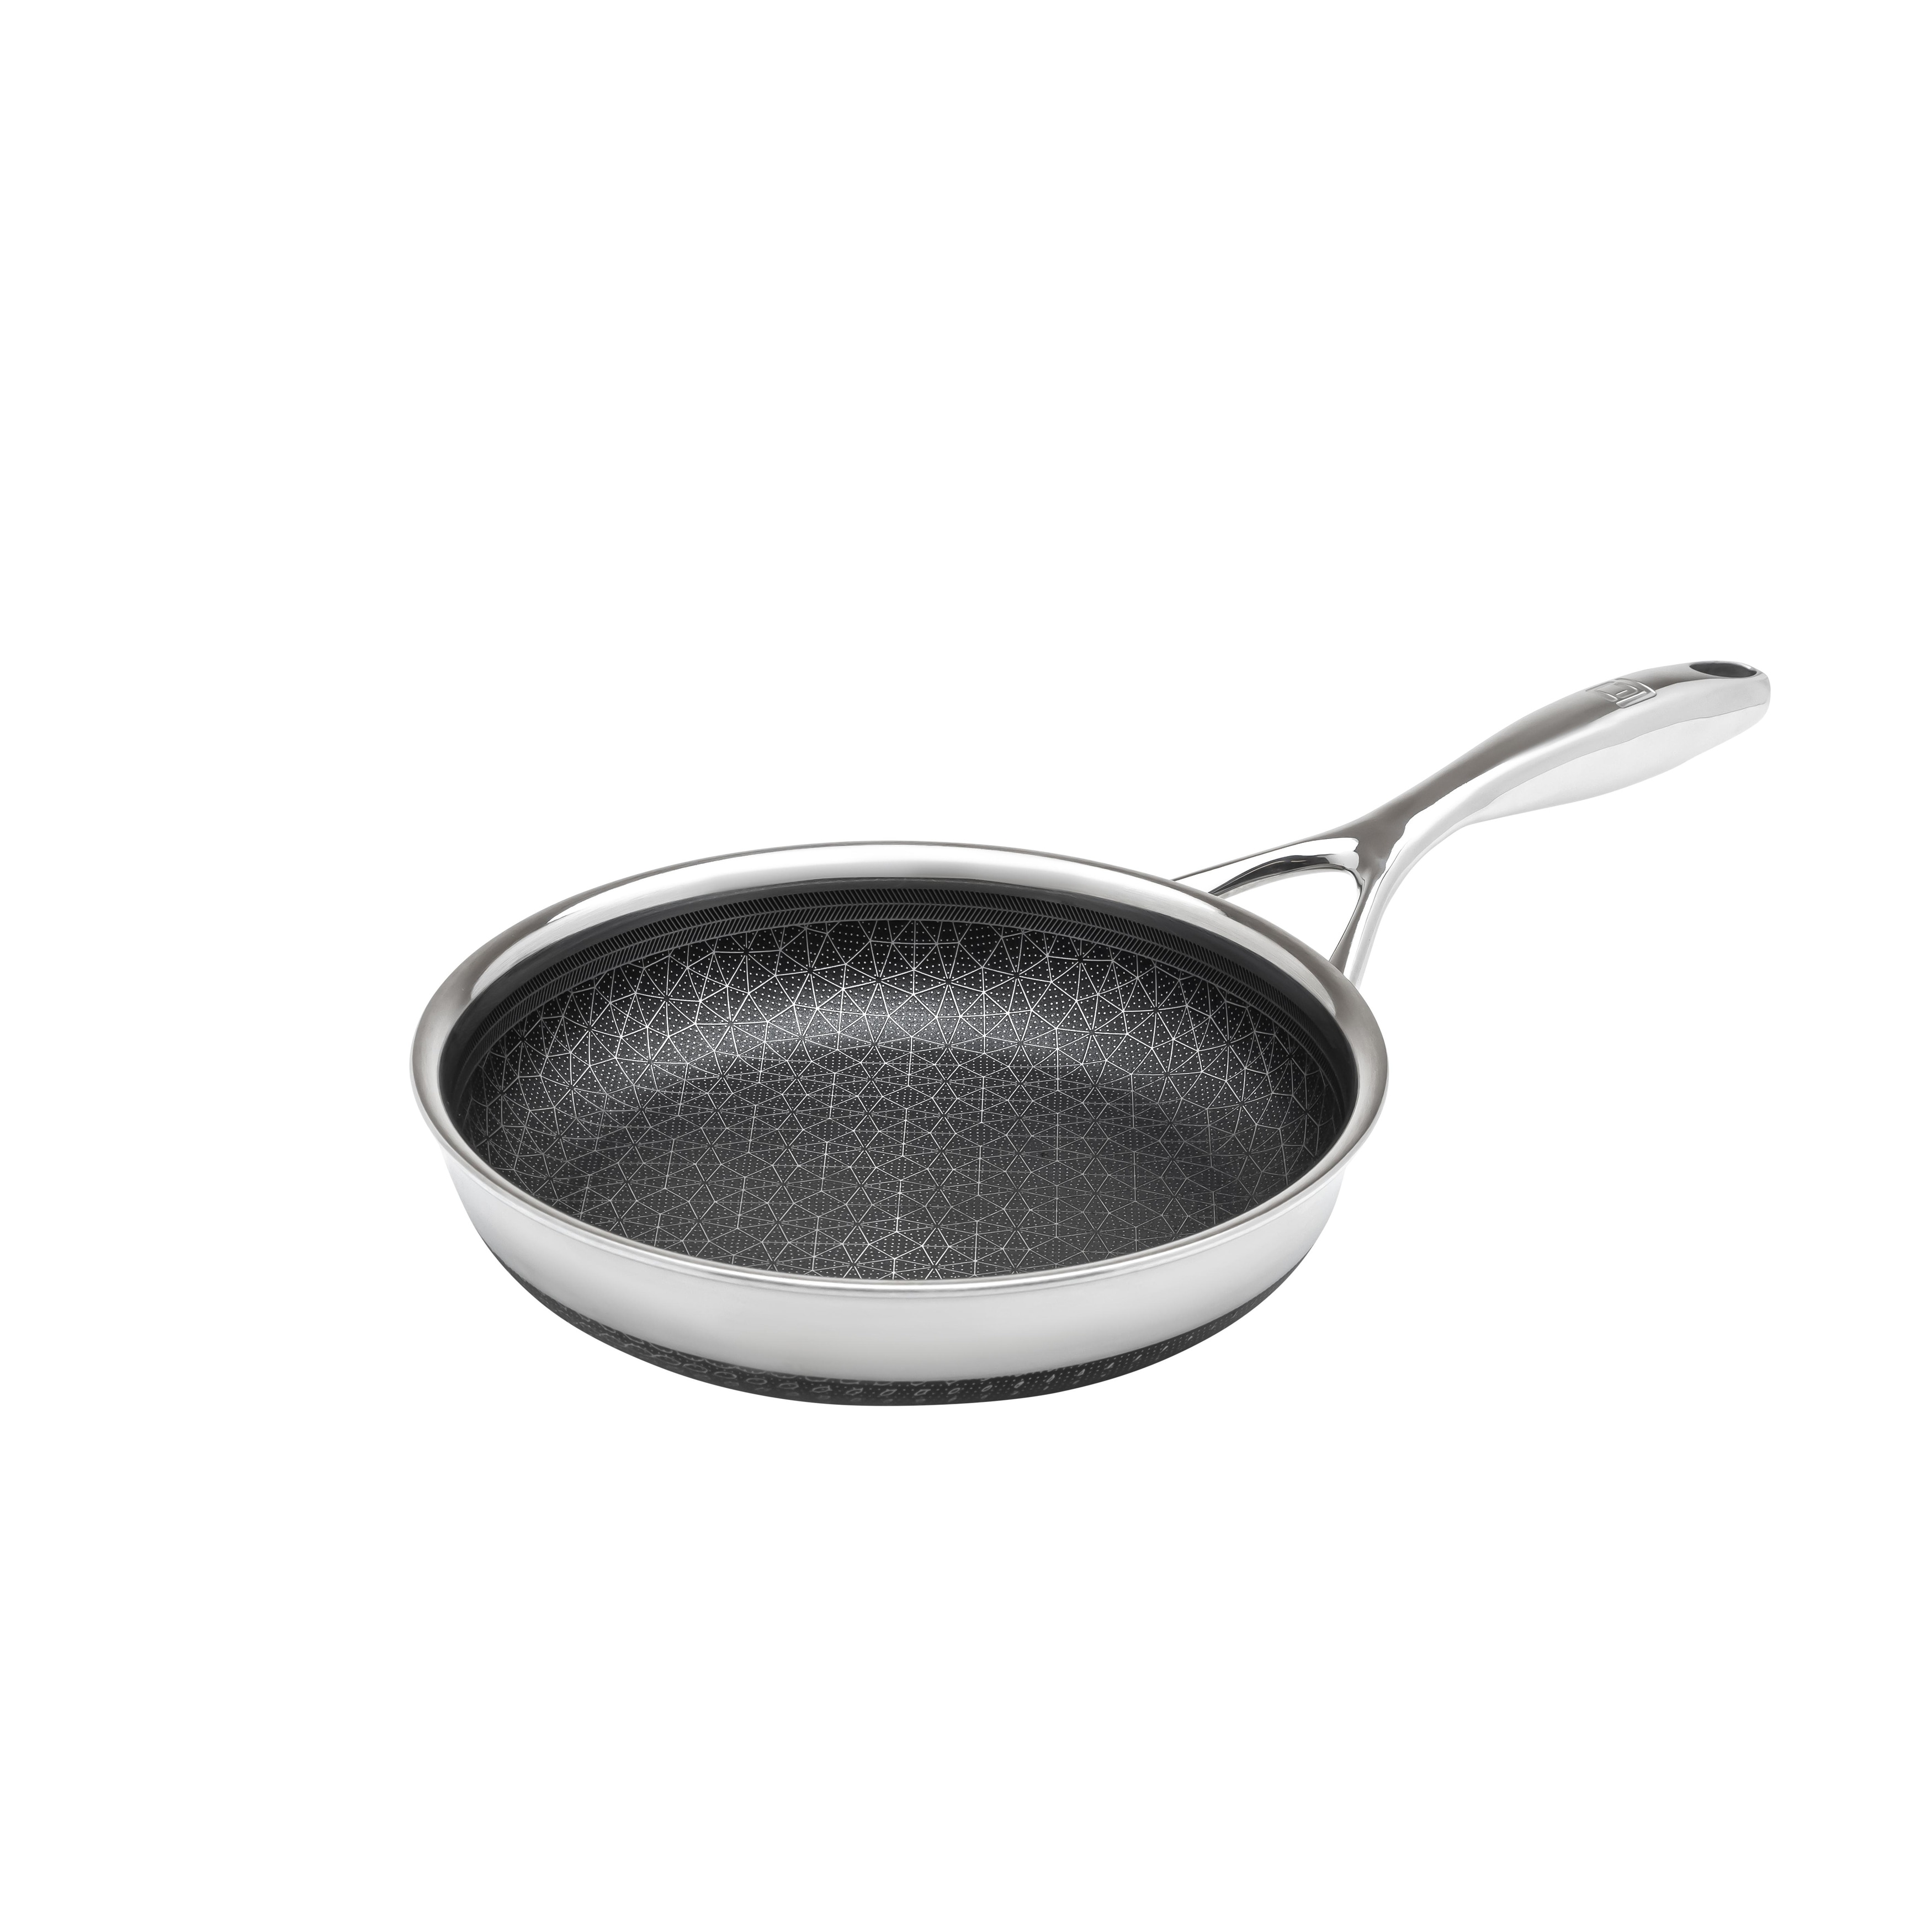  Swiss Diamond 8 Inch Frying Pan - HD Nonstick Diamond Coated  Aluminum Skillet - PFOA Free, Dishwasher Safe and Oven Safe Fry Pan, Grey:  Home & Kitchen